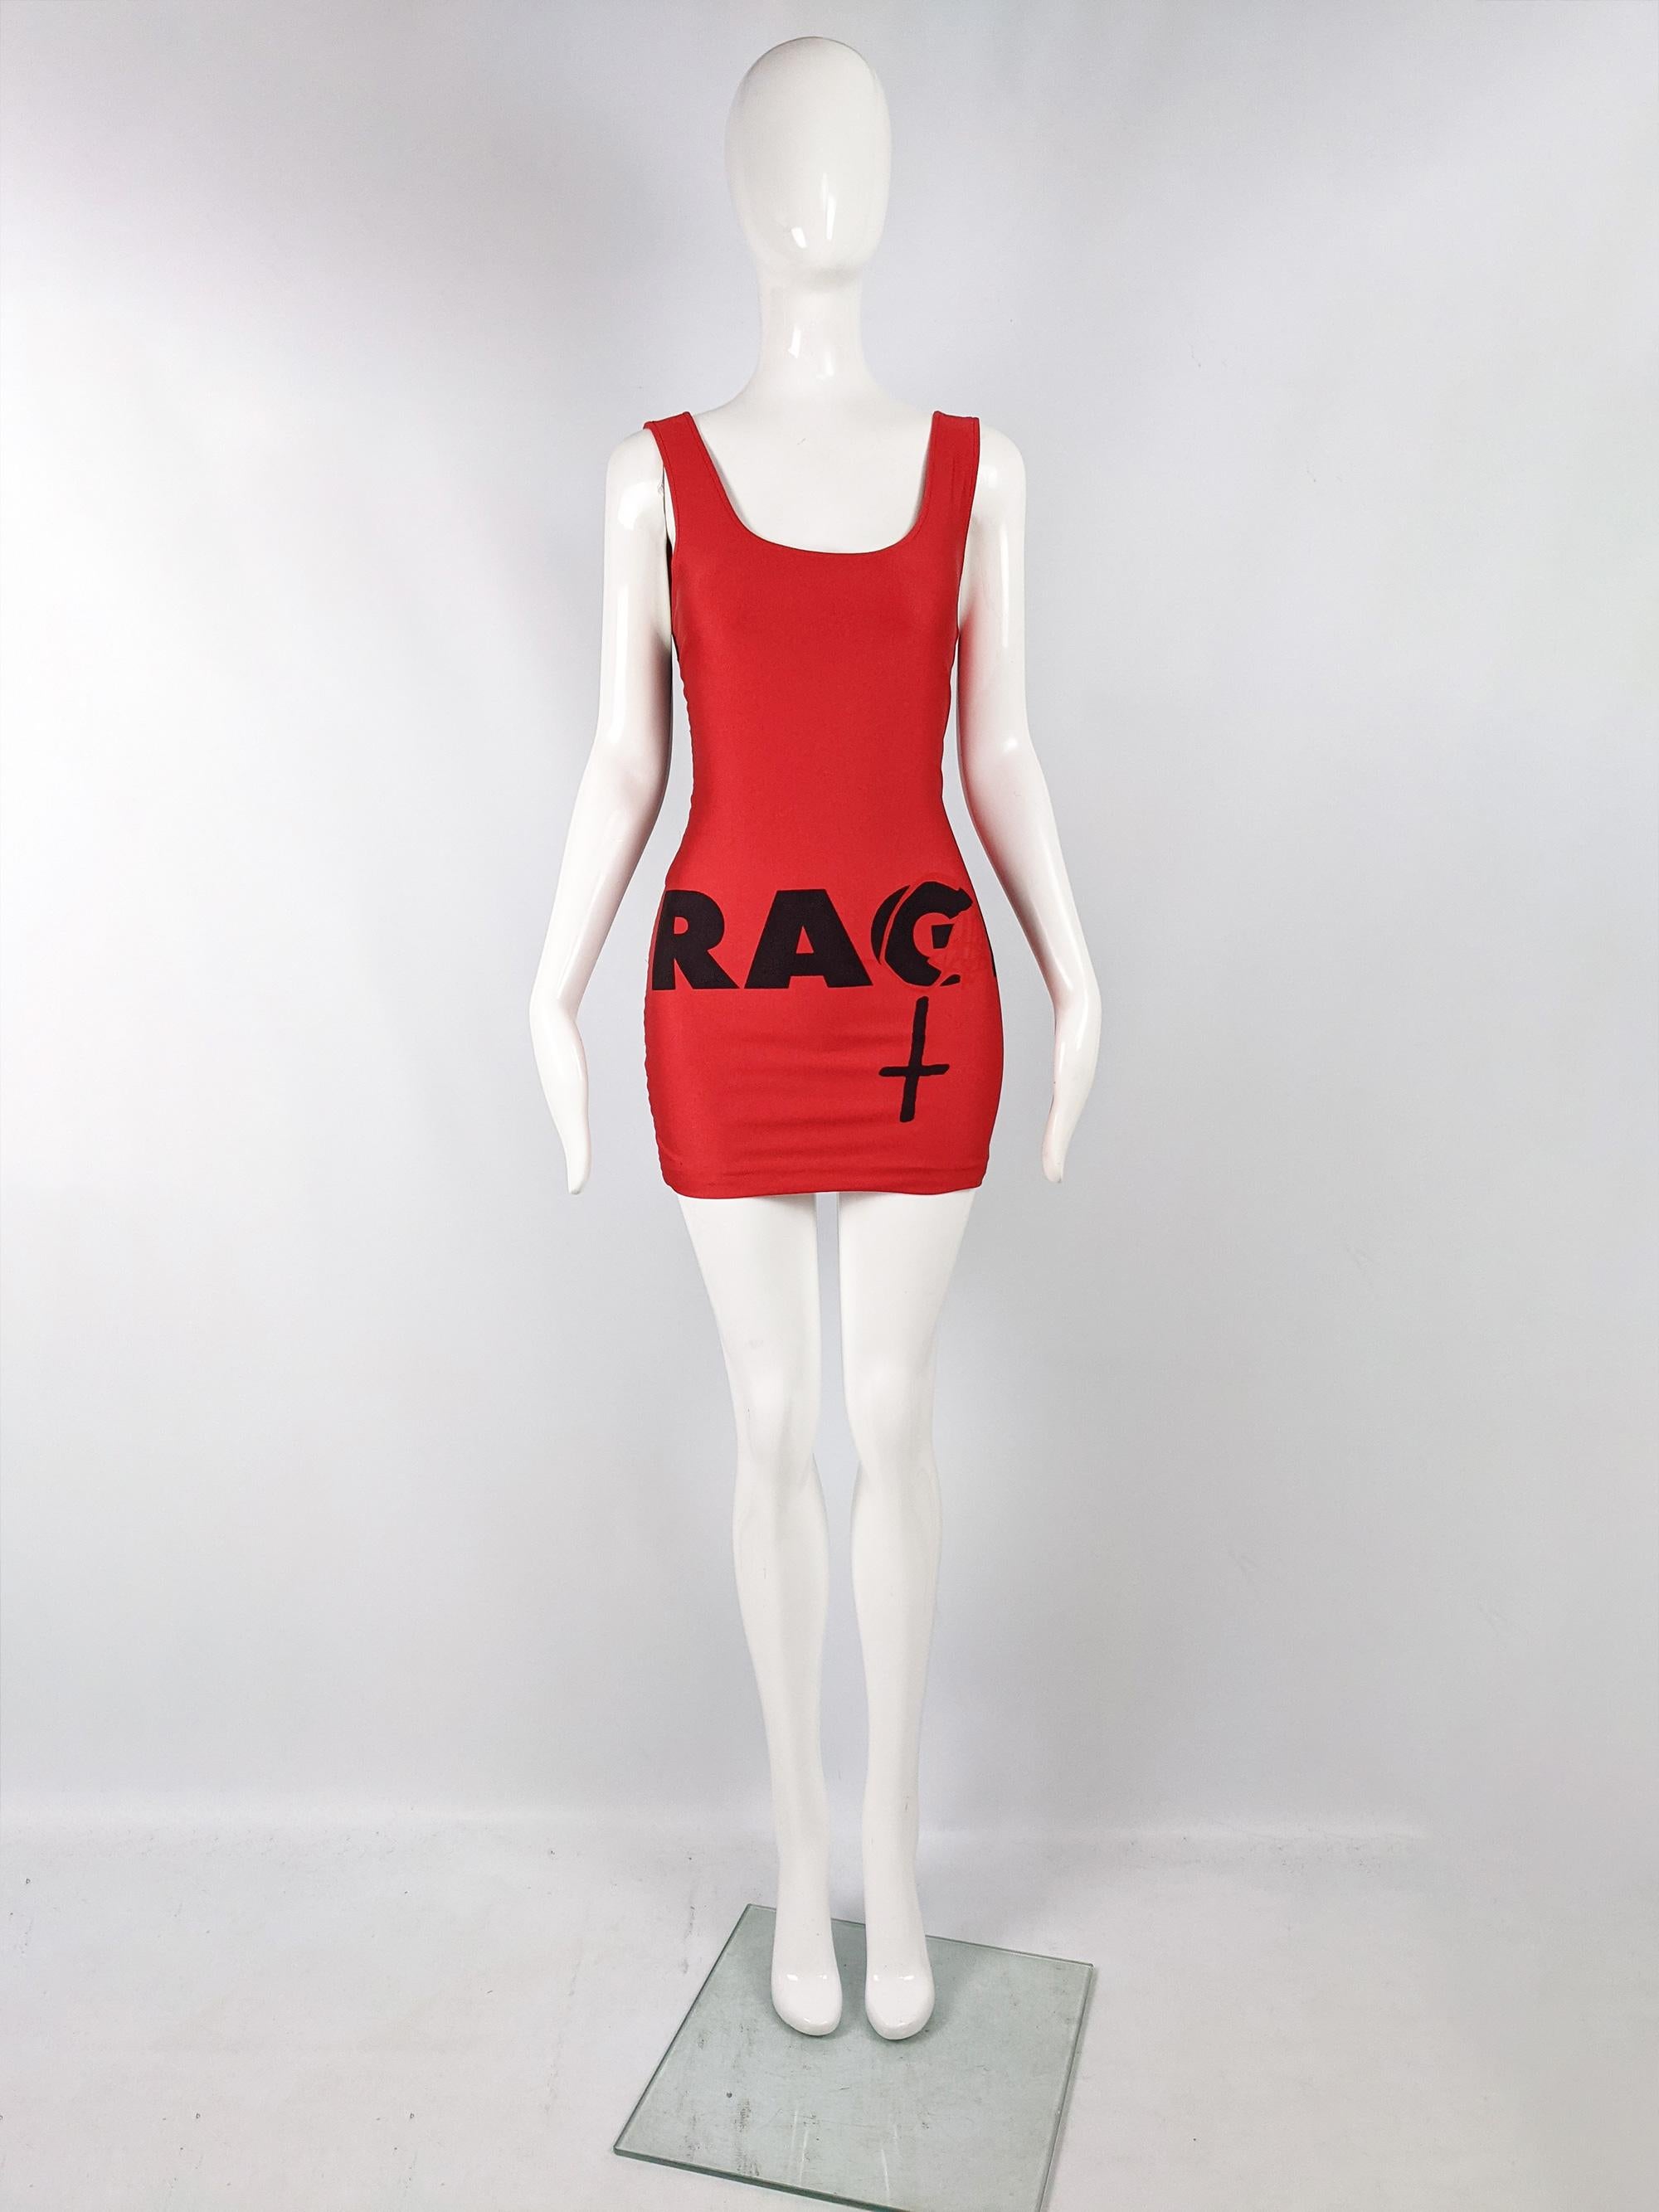 A sexy vintage sleeveless party / rave dress from the late 80s / early 90s by singular British icon, Helen Storey, an artist and fashion designer who was known for her experimental designs worn by the likes of Madonna and Cher. In a red stretch